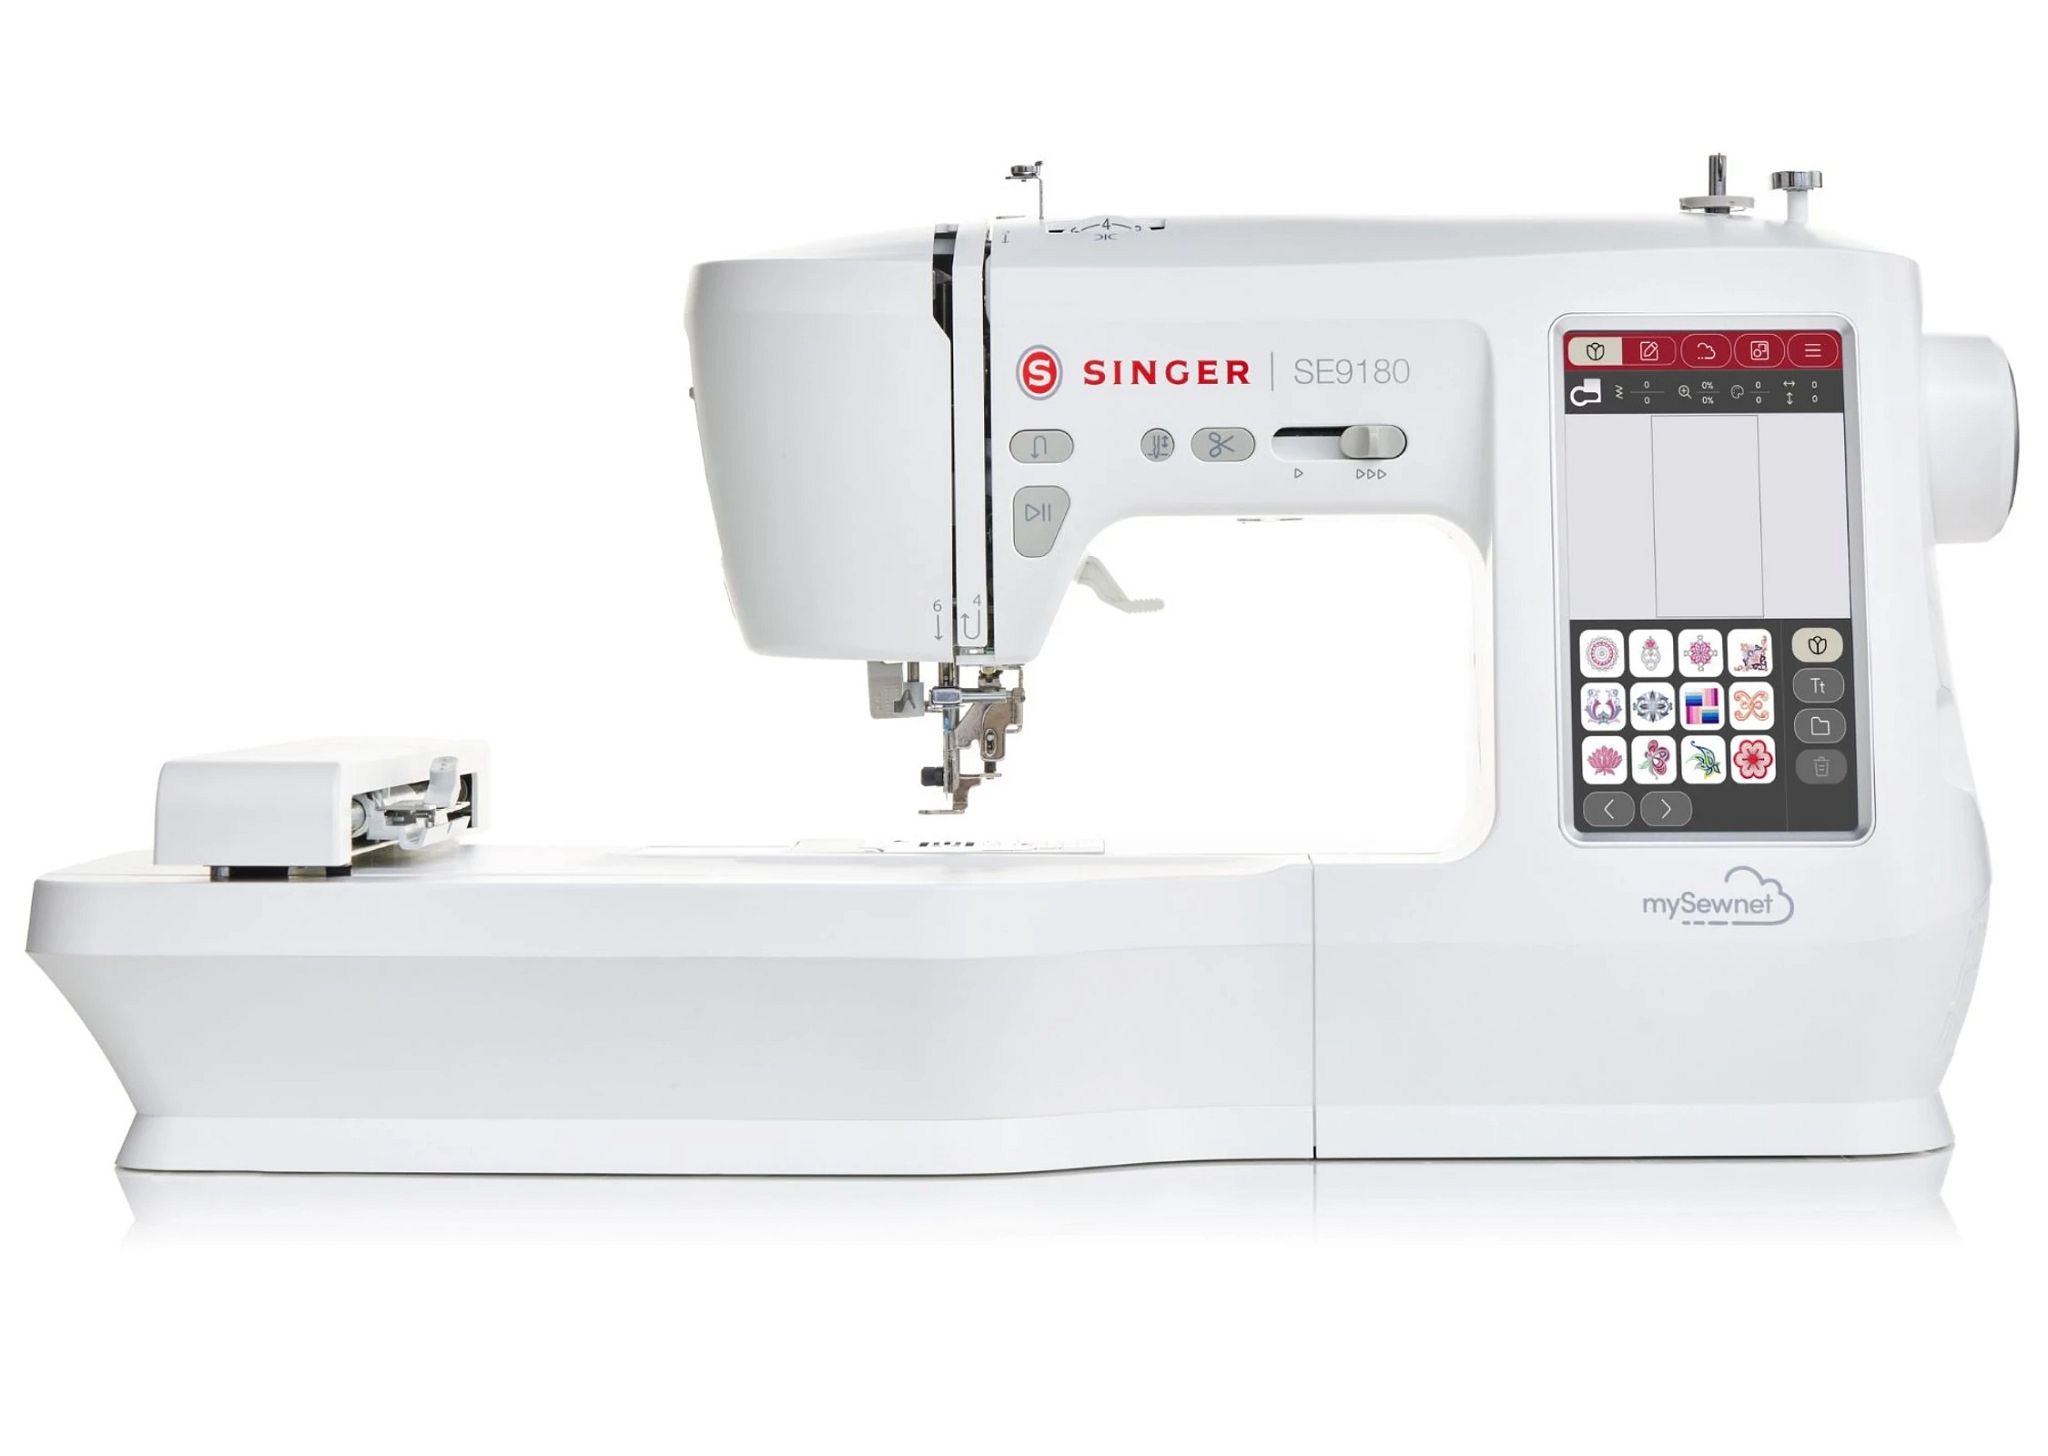 SE9180 Sewing and Embroidery Machine & 100 x 100mm Embroidery Hoop 